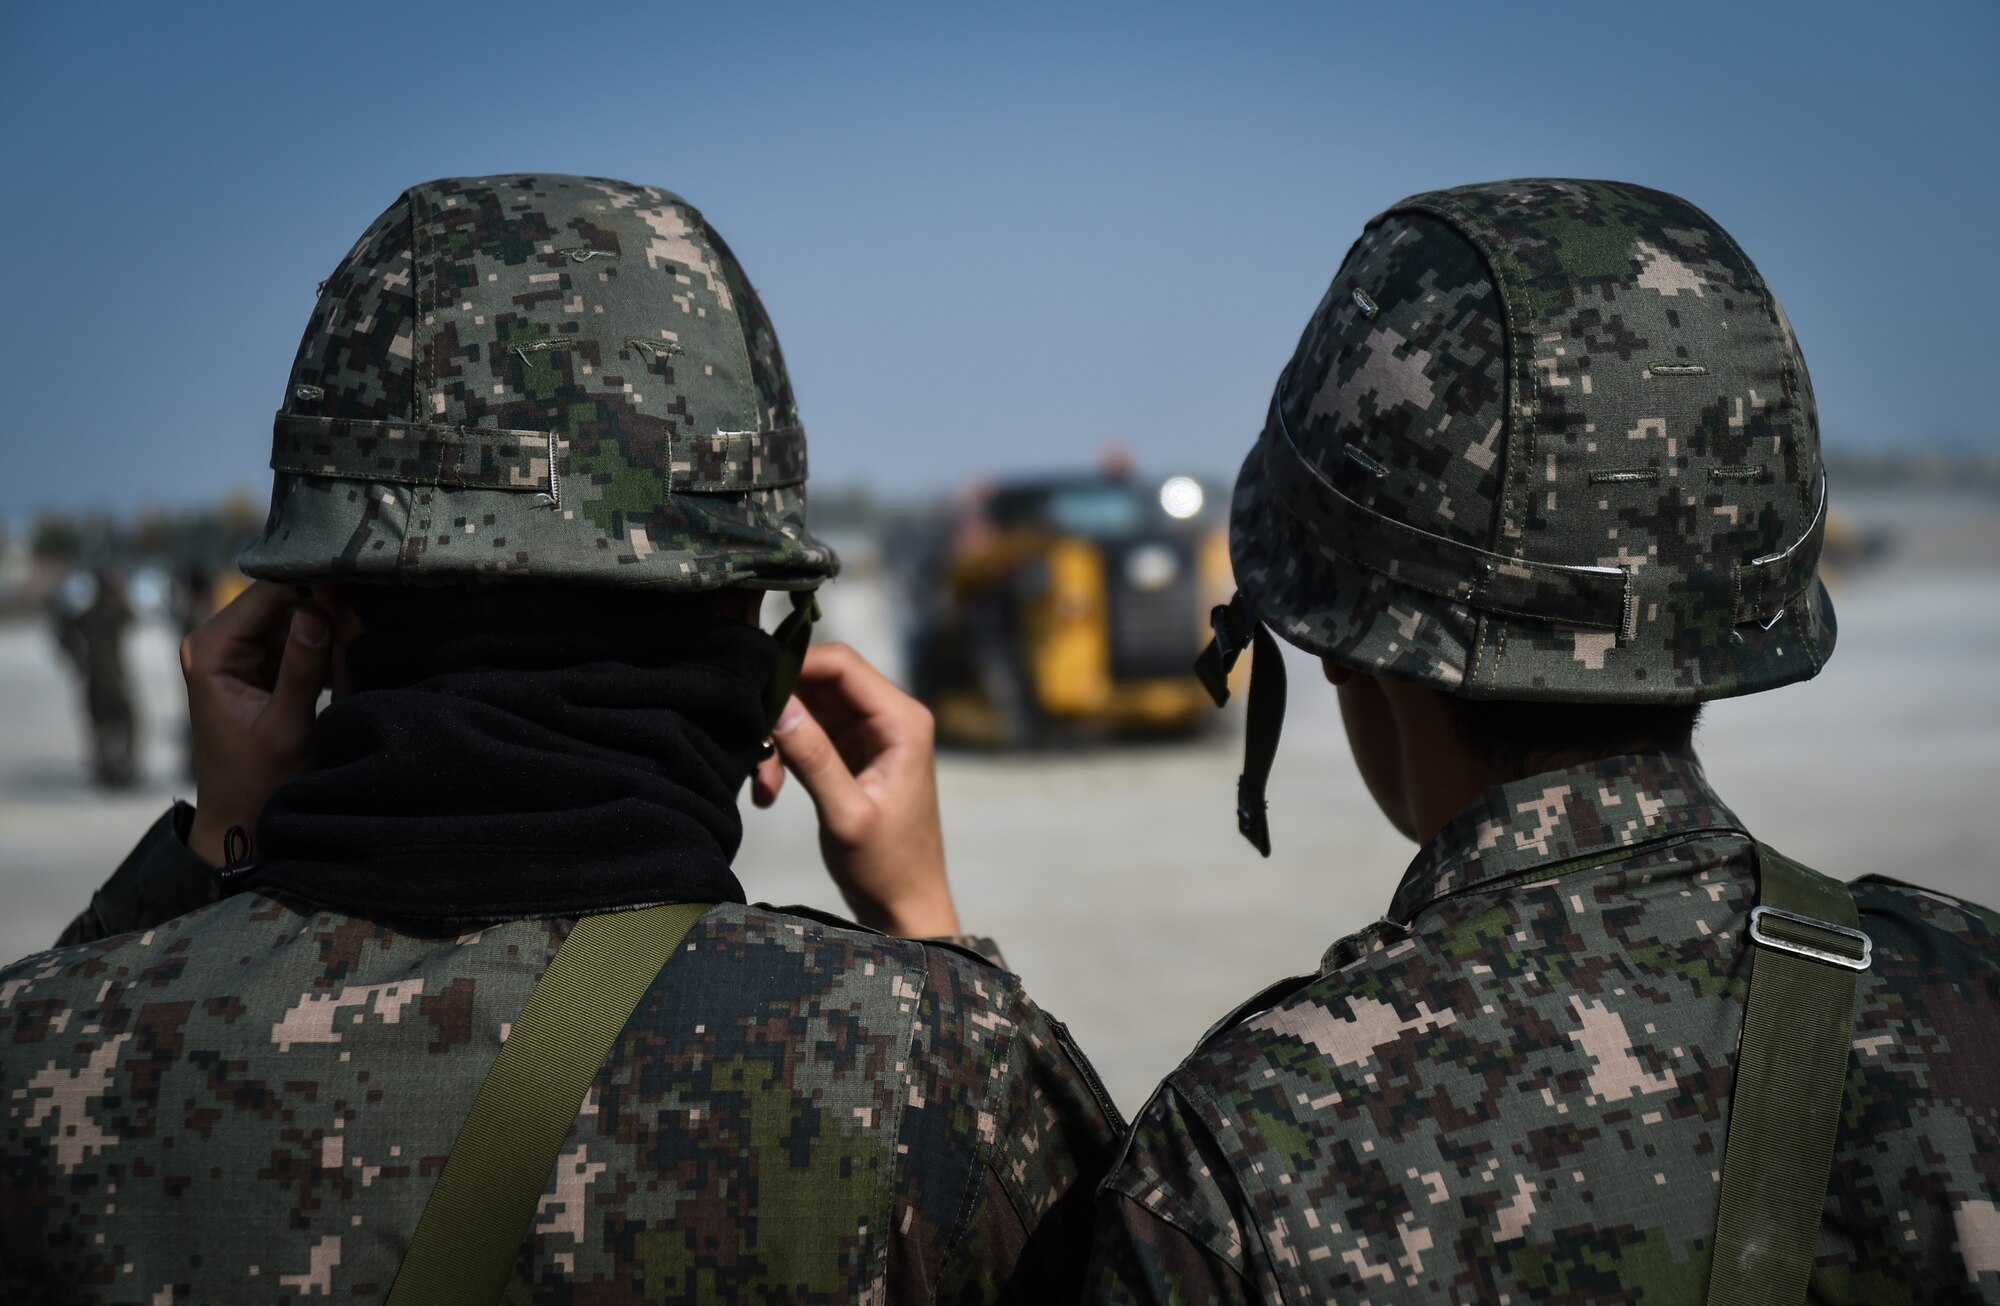 Republic of Korea Air Force Airmen participate in a Rapid Airfield Damage Repair bilateral training exercise at Gwangju Air Base, R.O.K., Nov. 8, 2017. U.S. and R.O.K. Airmen trained together for a week to learn the new RADR process, preparing them for response to wartime contingencies, enhancing interoperability and building partnership capacity in the Indo-Asia Pacific region. The new process makes use of rapid-setting concrete which enables vehicles to pass over it after one hour, and after two hours of cure time, it can support any and all aircraft. (U.S. Air Force photo by Senior Airman Curt Beach)